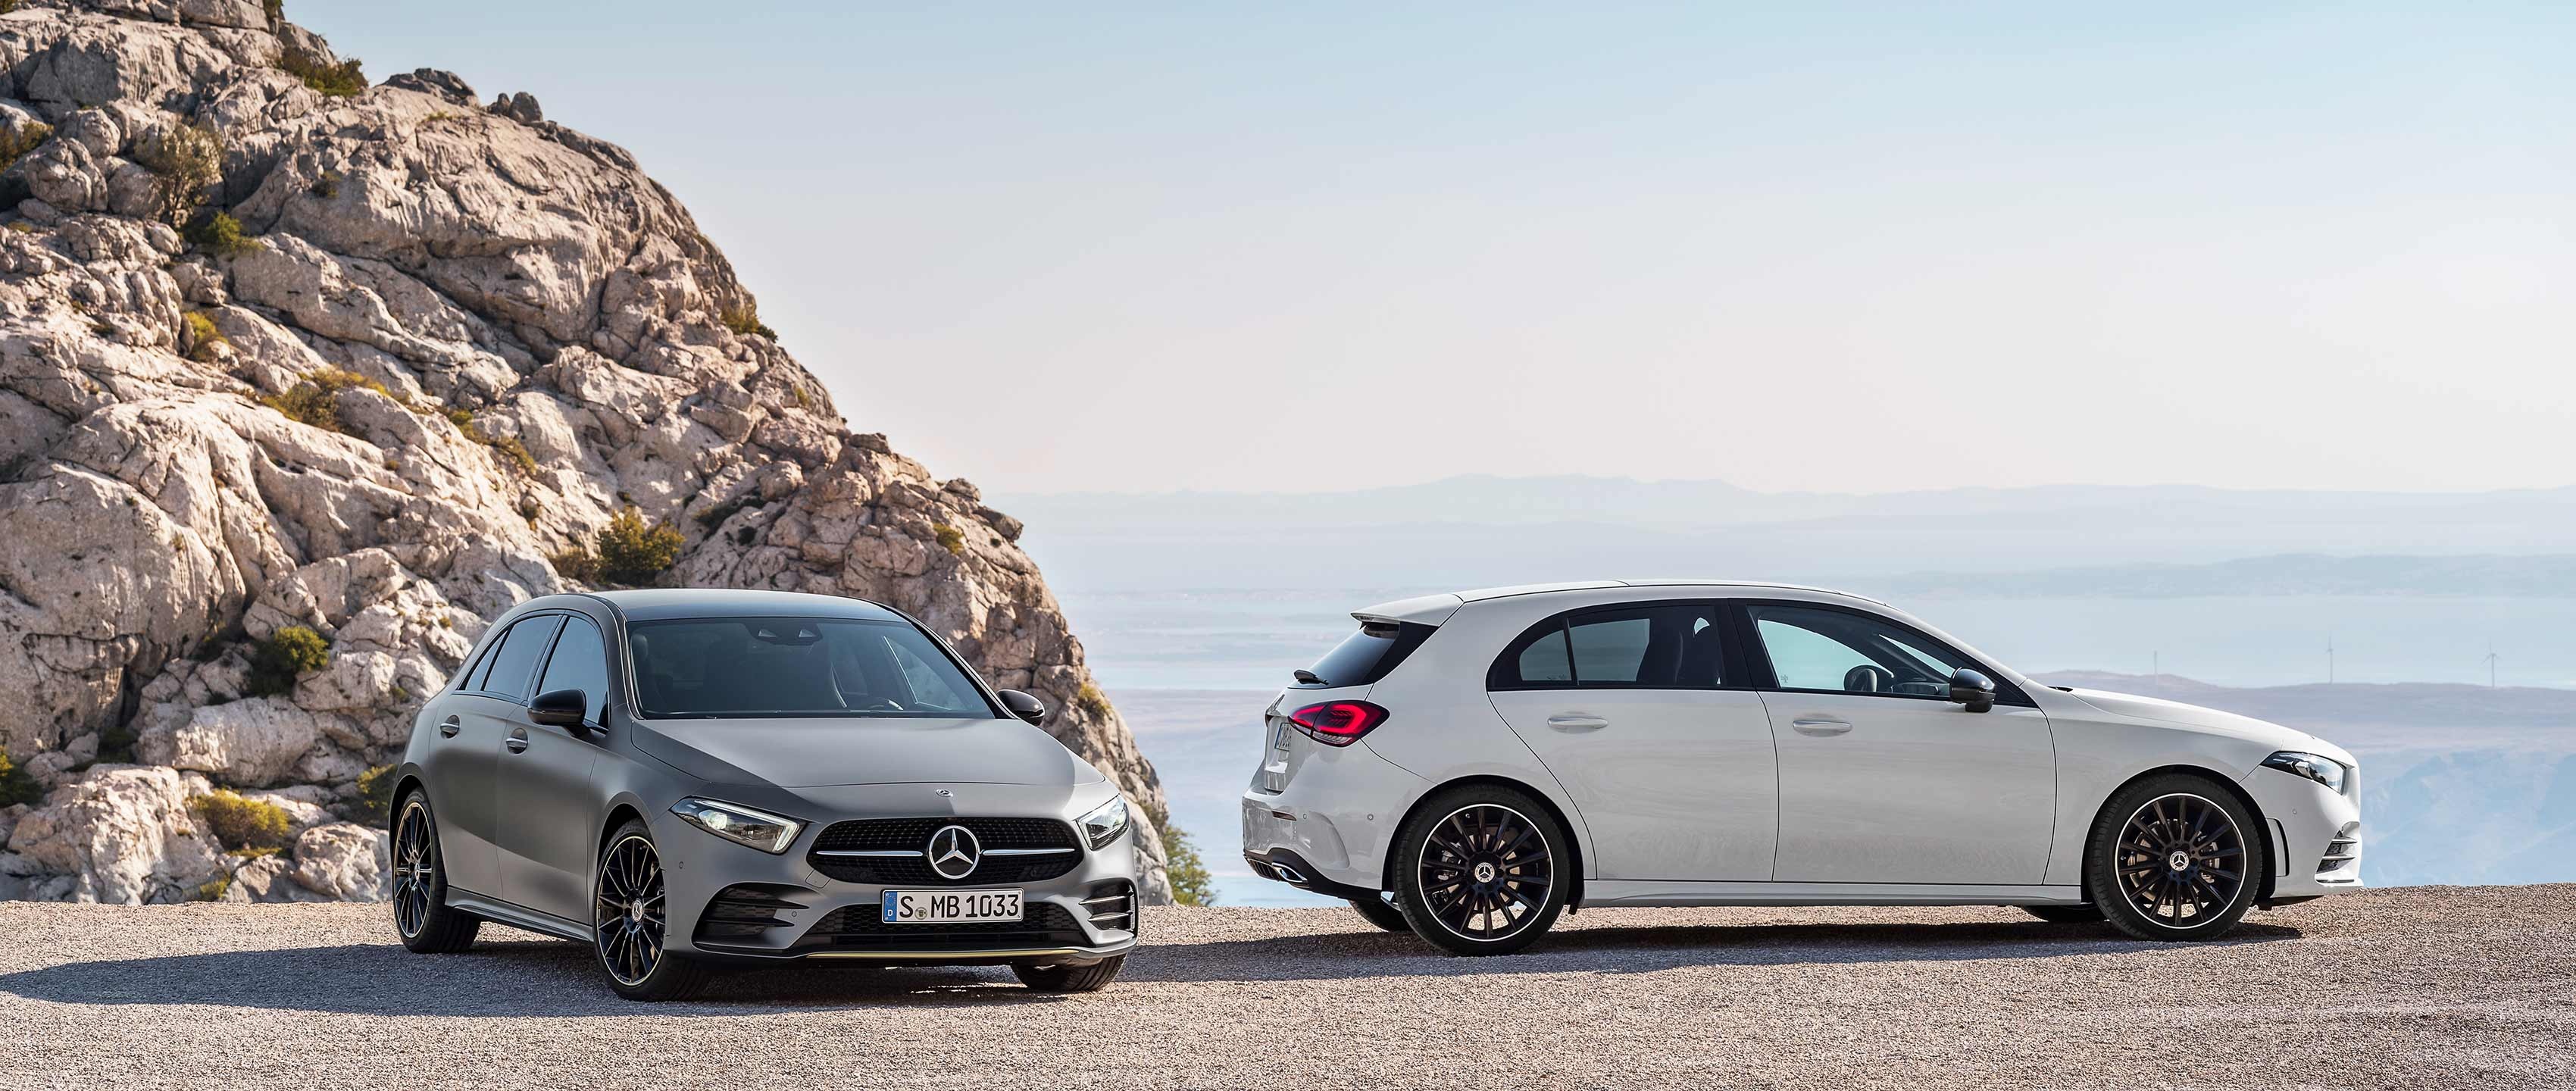 Mercedes-Benz A-Class, Benchmark in compact class, Ultimate driving experience, Premium features, 3400x1440 Dual Screen Desktop